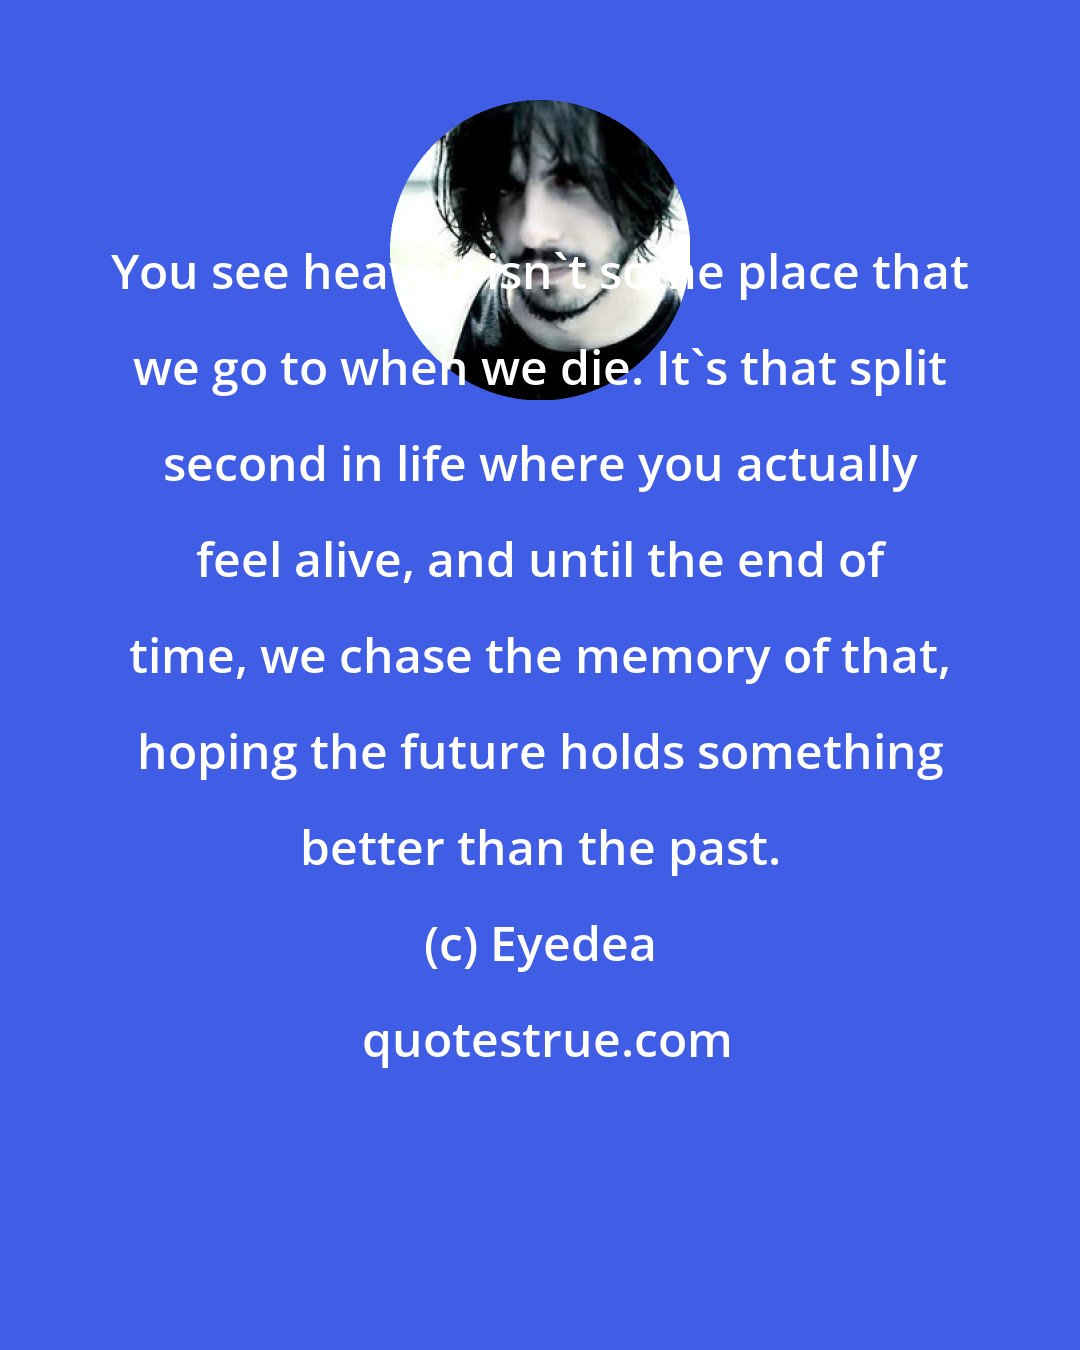 Eyedea: You see heaven isn't some place that we go to when we die. It's that split second in life where you actually feel alive, and until the end of time, we chase the memory of that, hoping the future holds something better than the past.